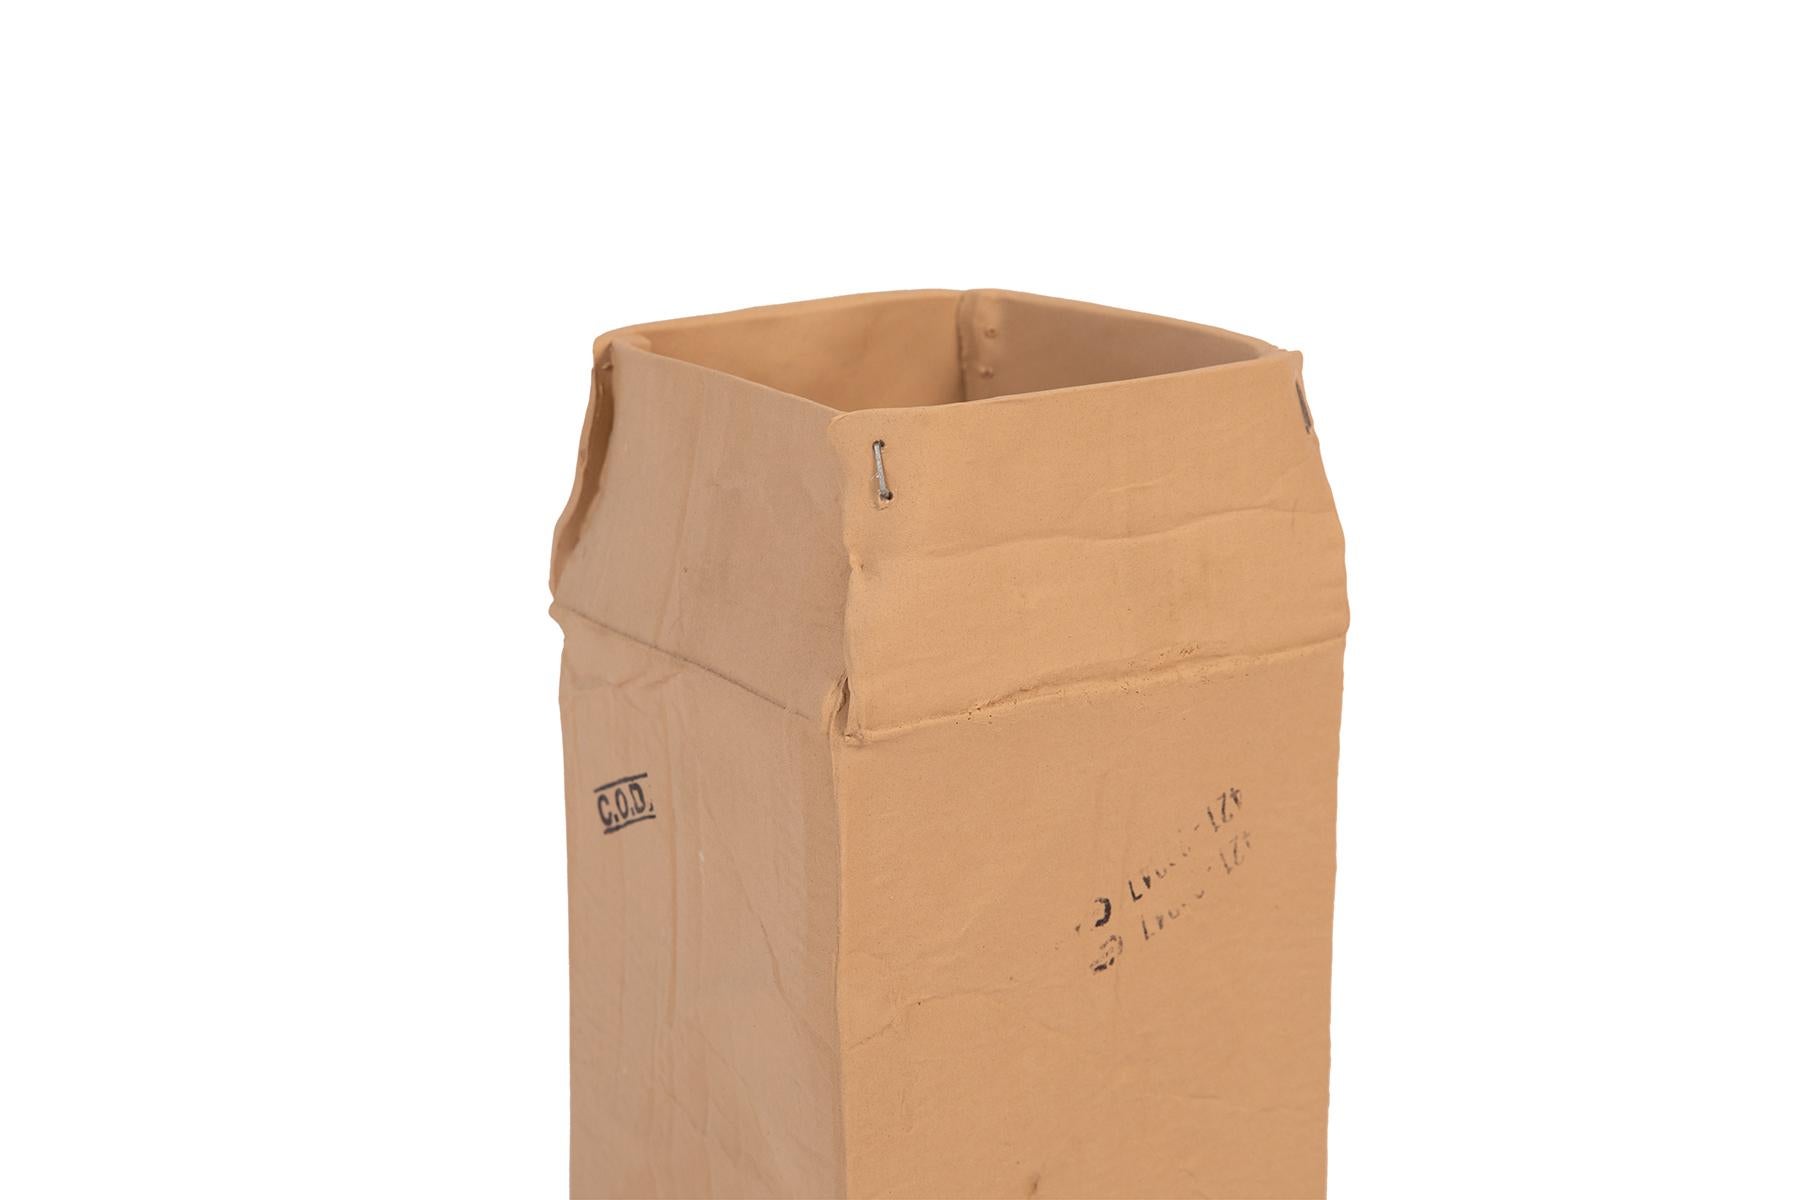 Post-Modern Ceramic Lamp Disguised as Cardboard Box by Michel Harvey For Sale